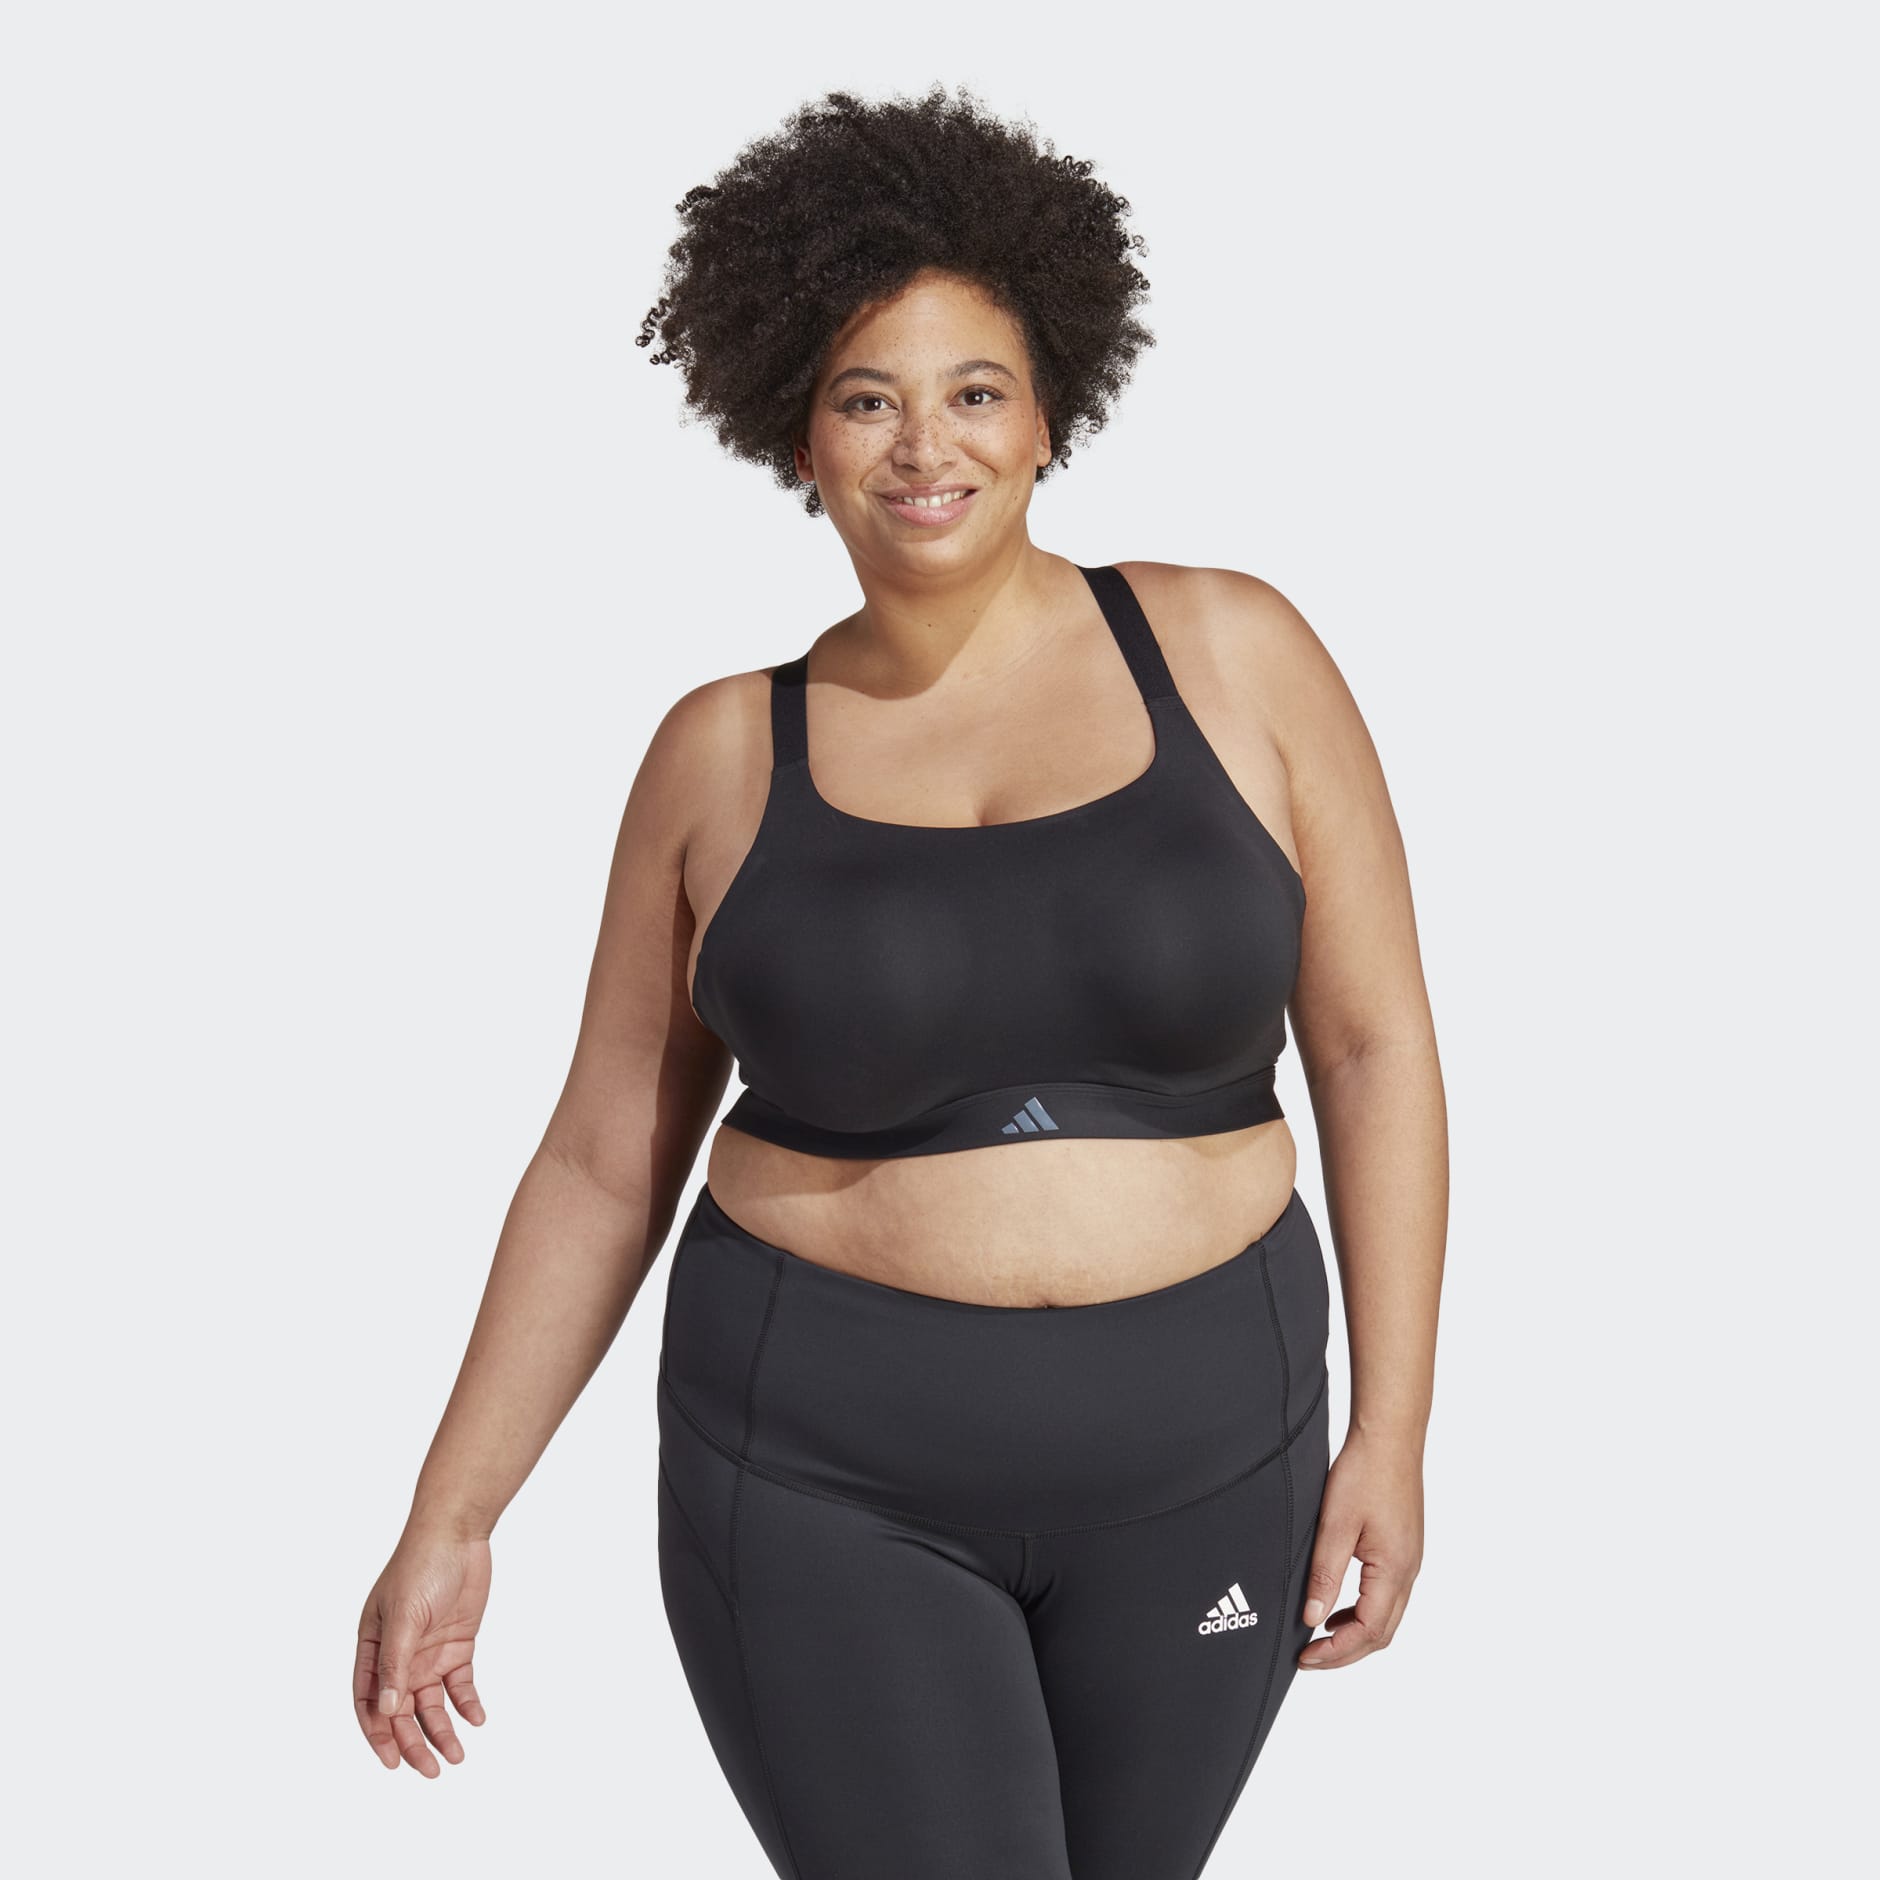 Clothing - Tailored Impact Luxe Training High-Support Bra (Plus Size) -  Black